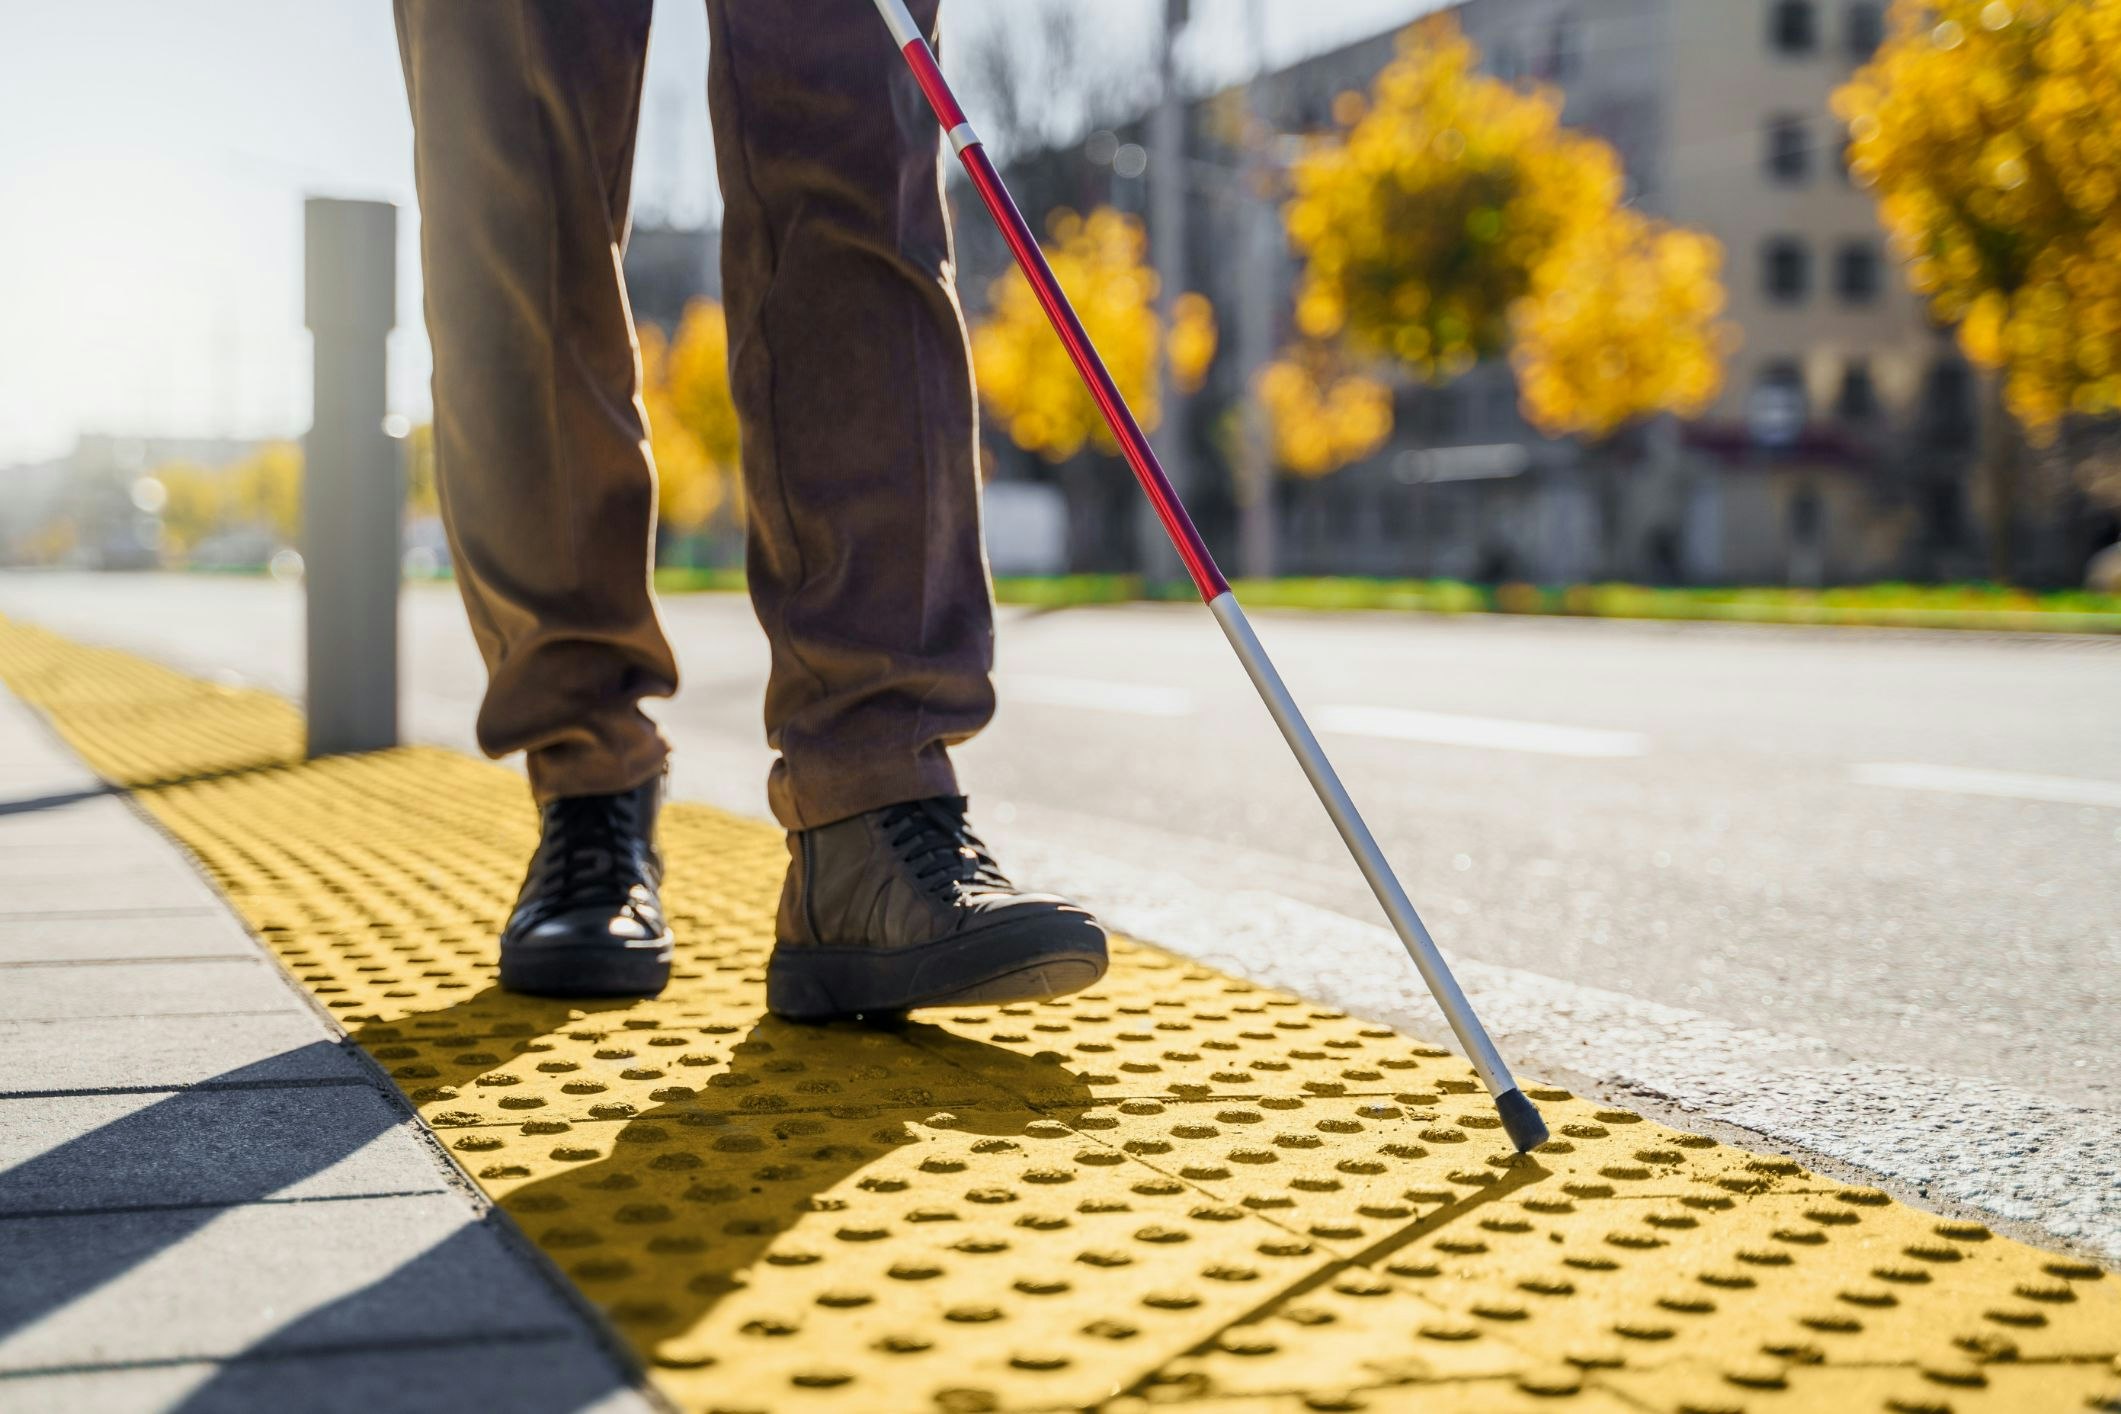 <p>Australians who are blind or have low vision can gain independence through support given by organisations such as Vision Australia. [Source: Shutterstock]</p>
